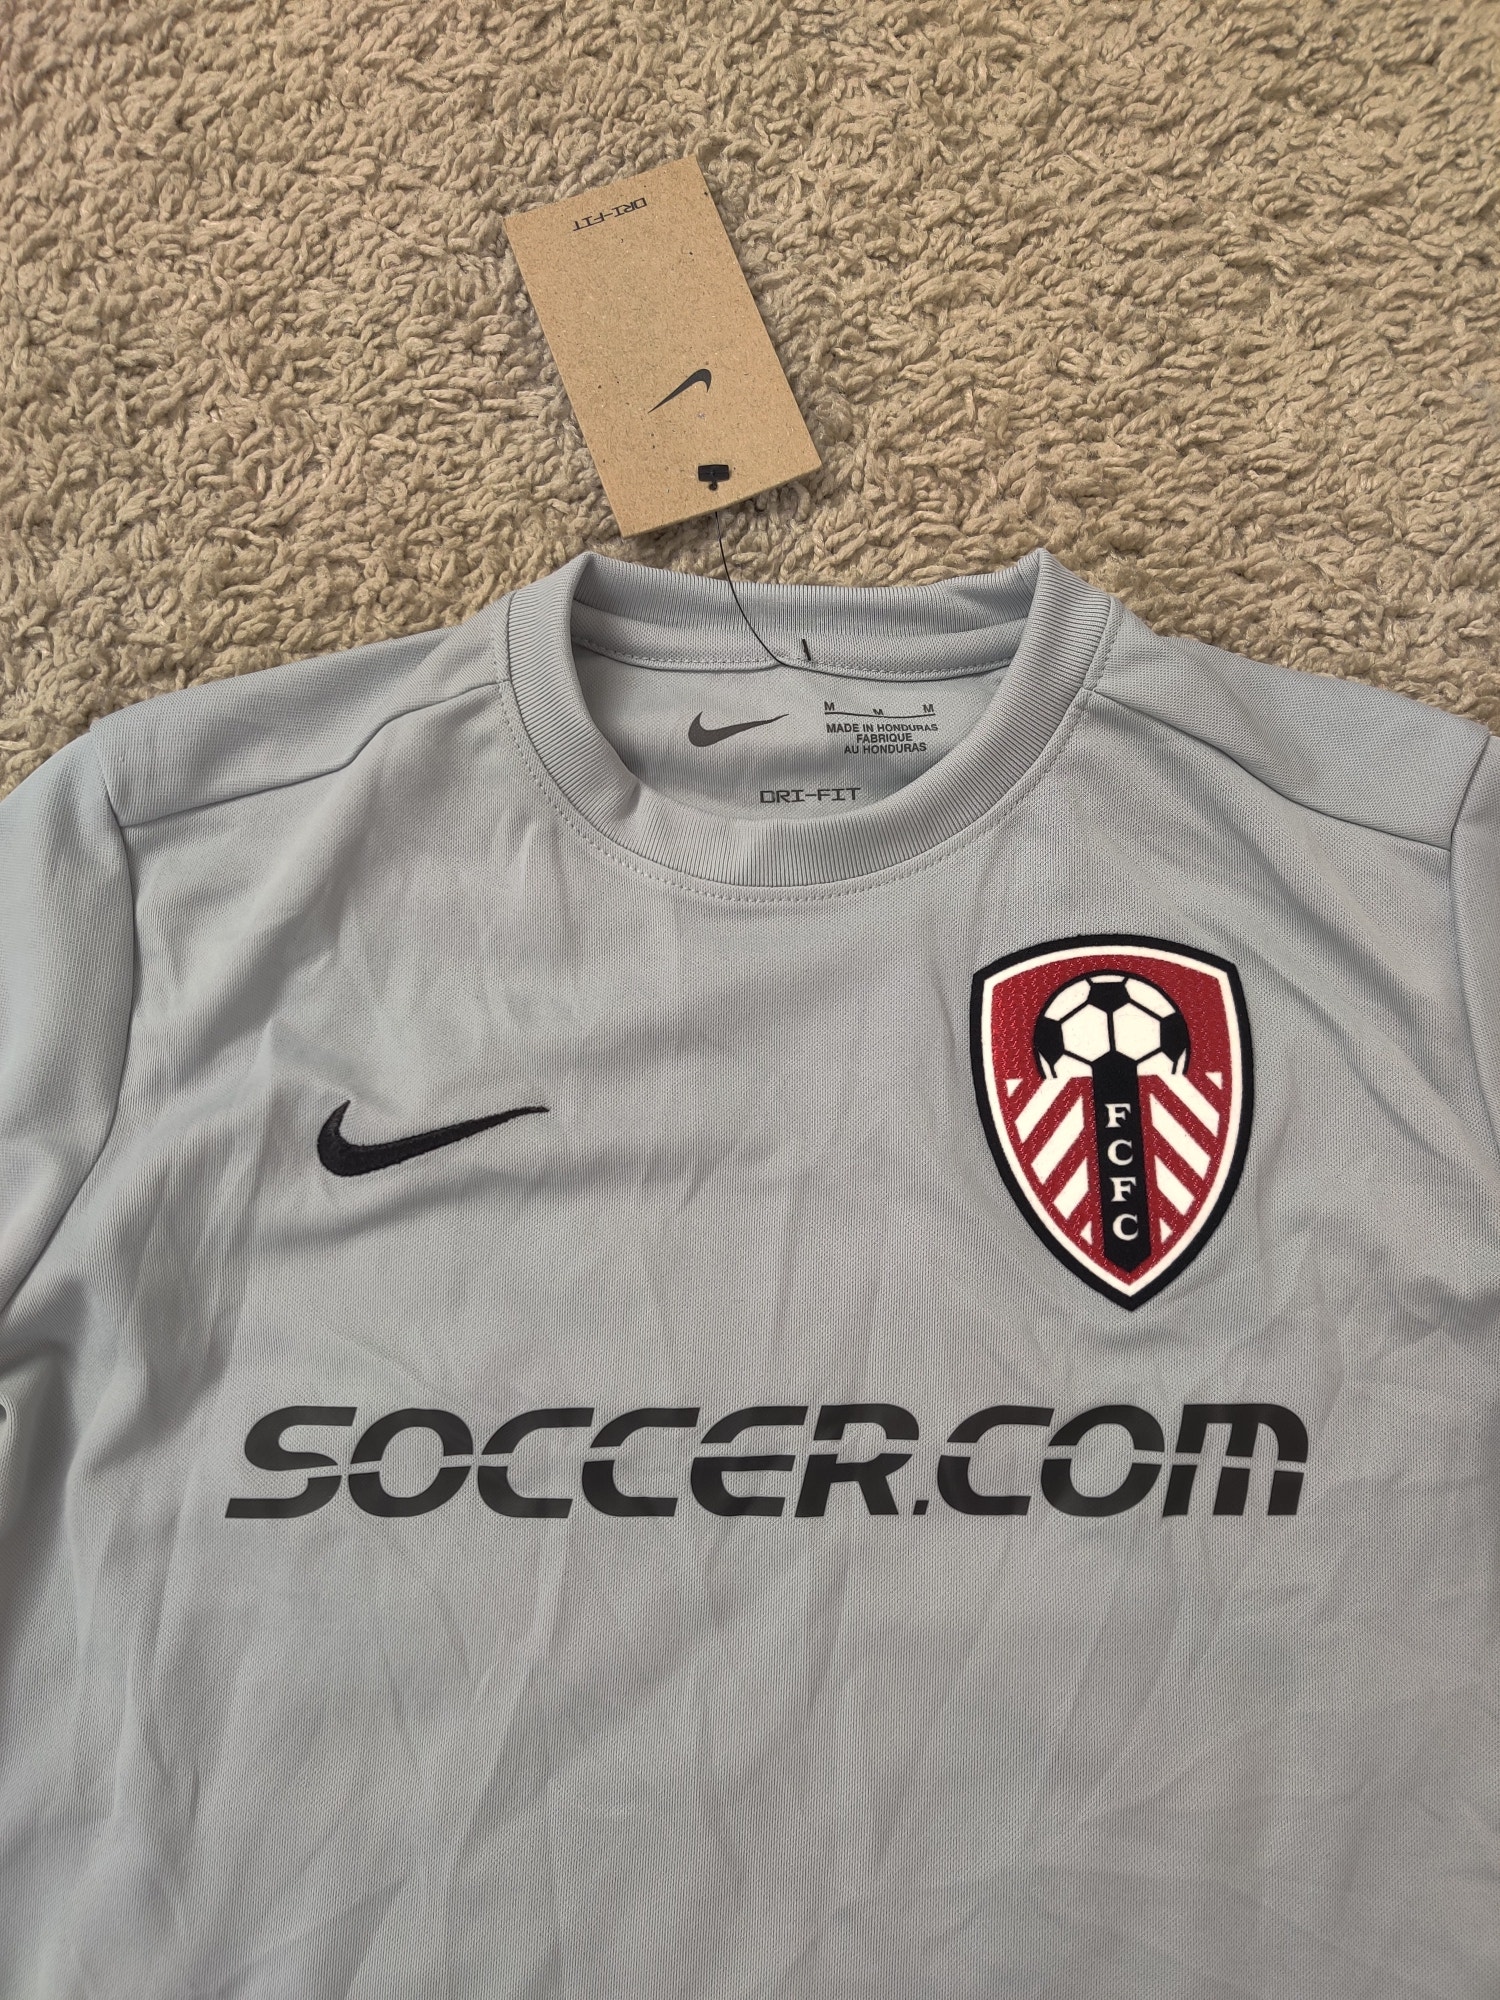 (V) NEW Nike Dri-Fit Youth FCFC #19 shirt soccer jersey sport sz S - Picture 4 of 9